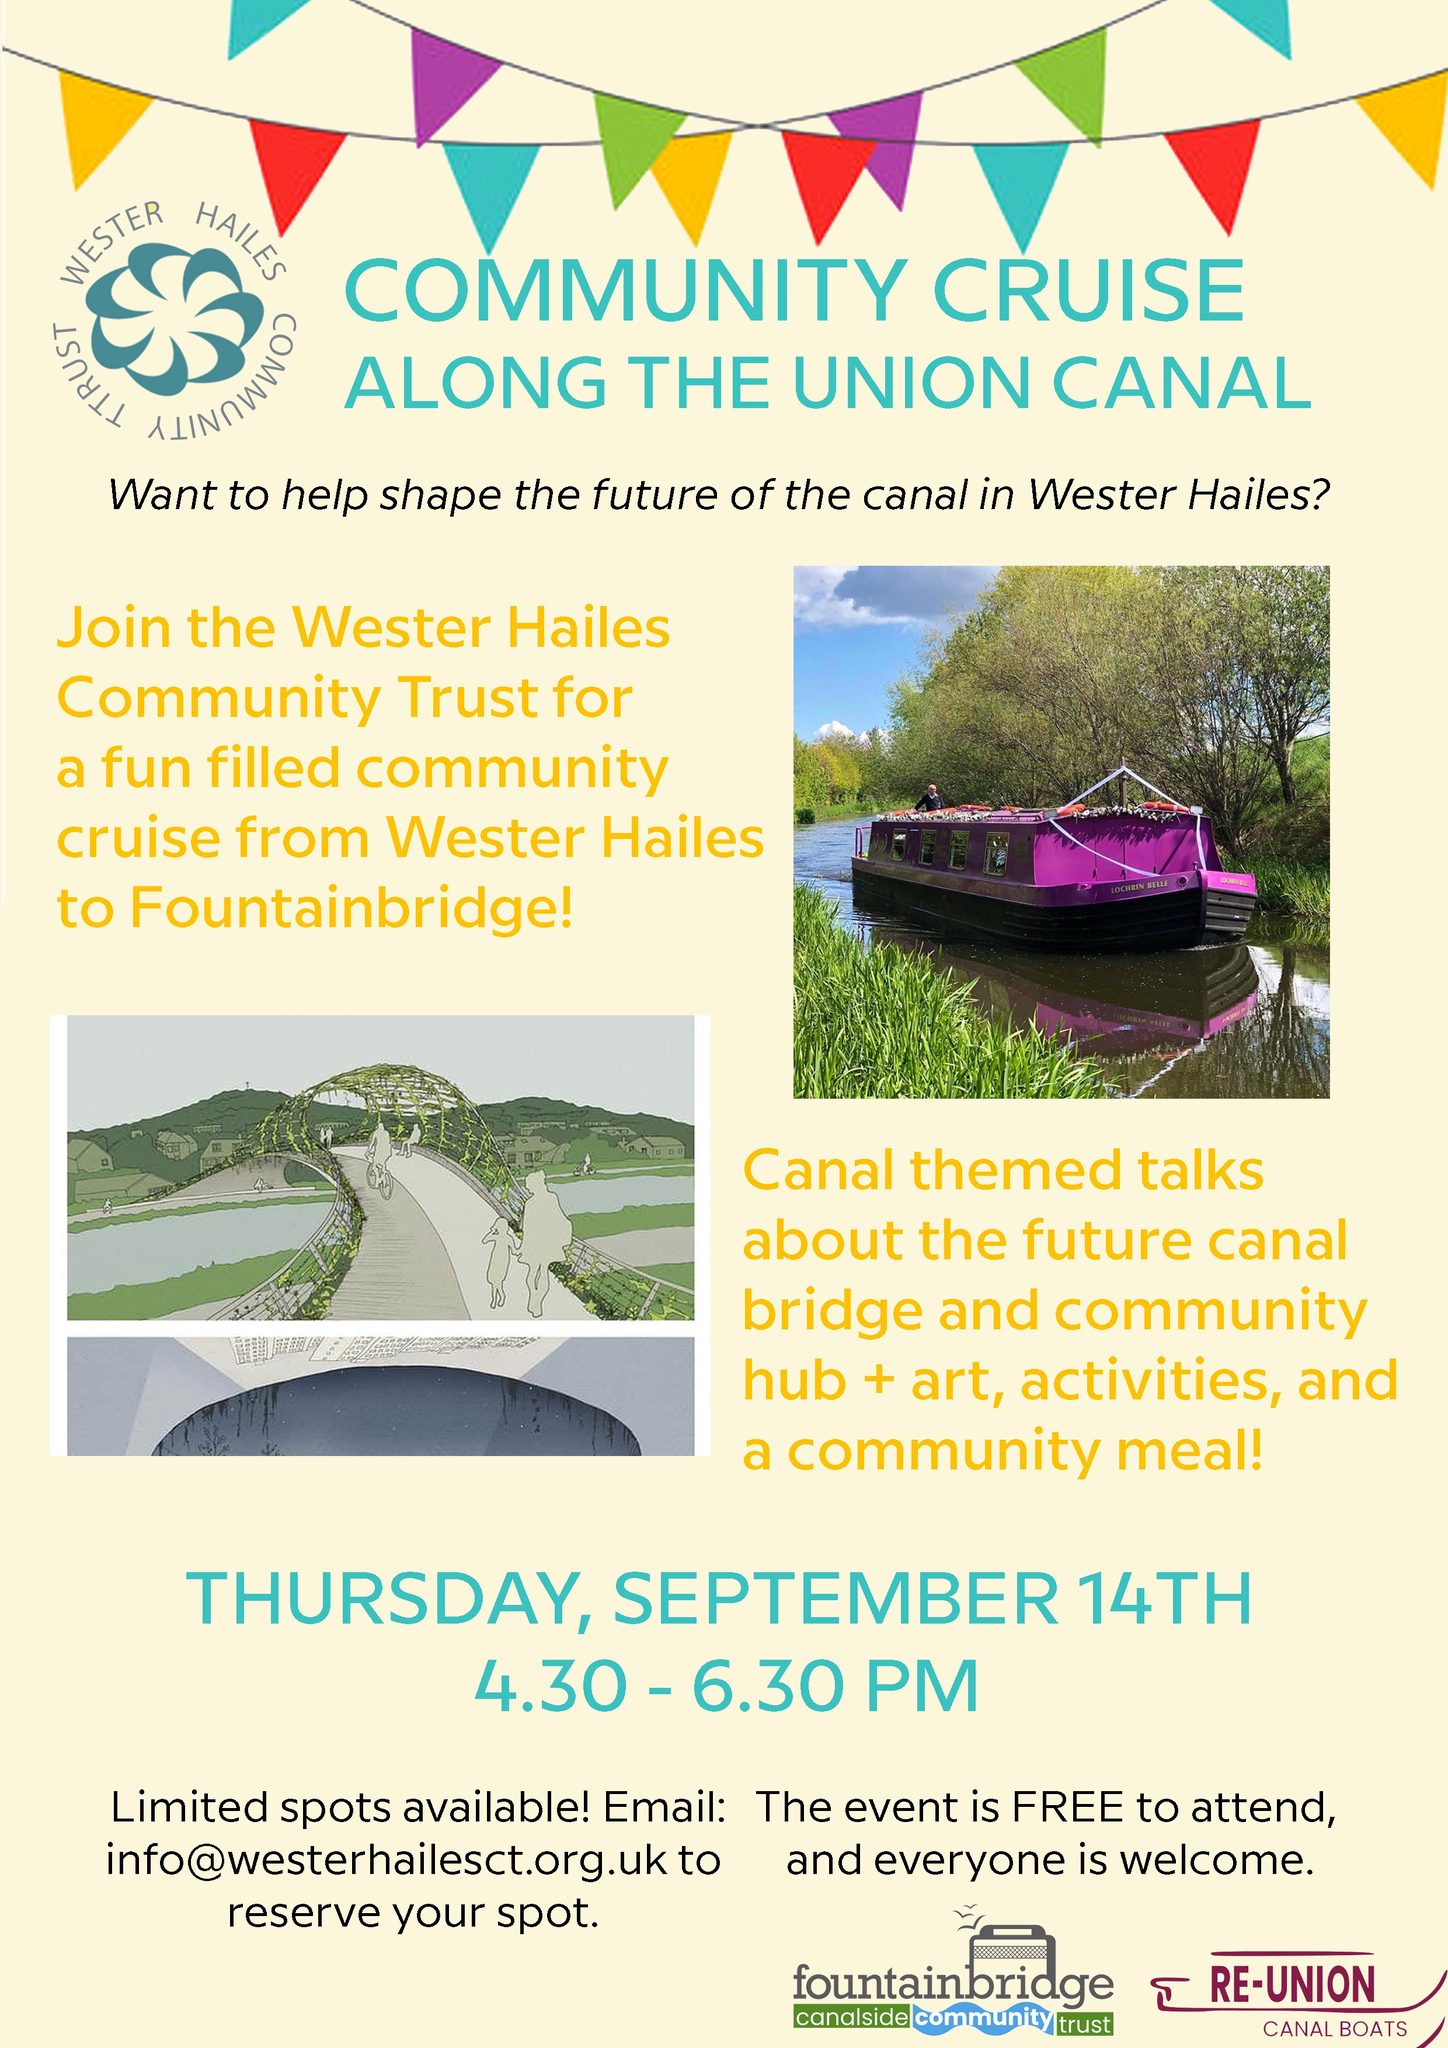 community cruise along the union canal